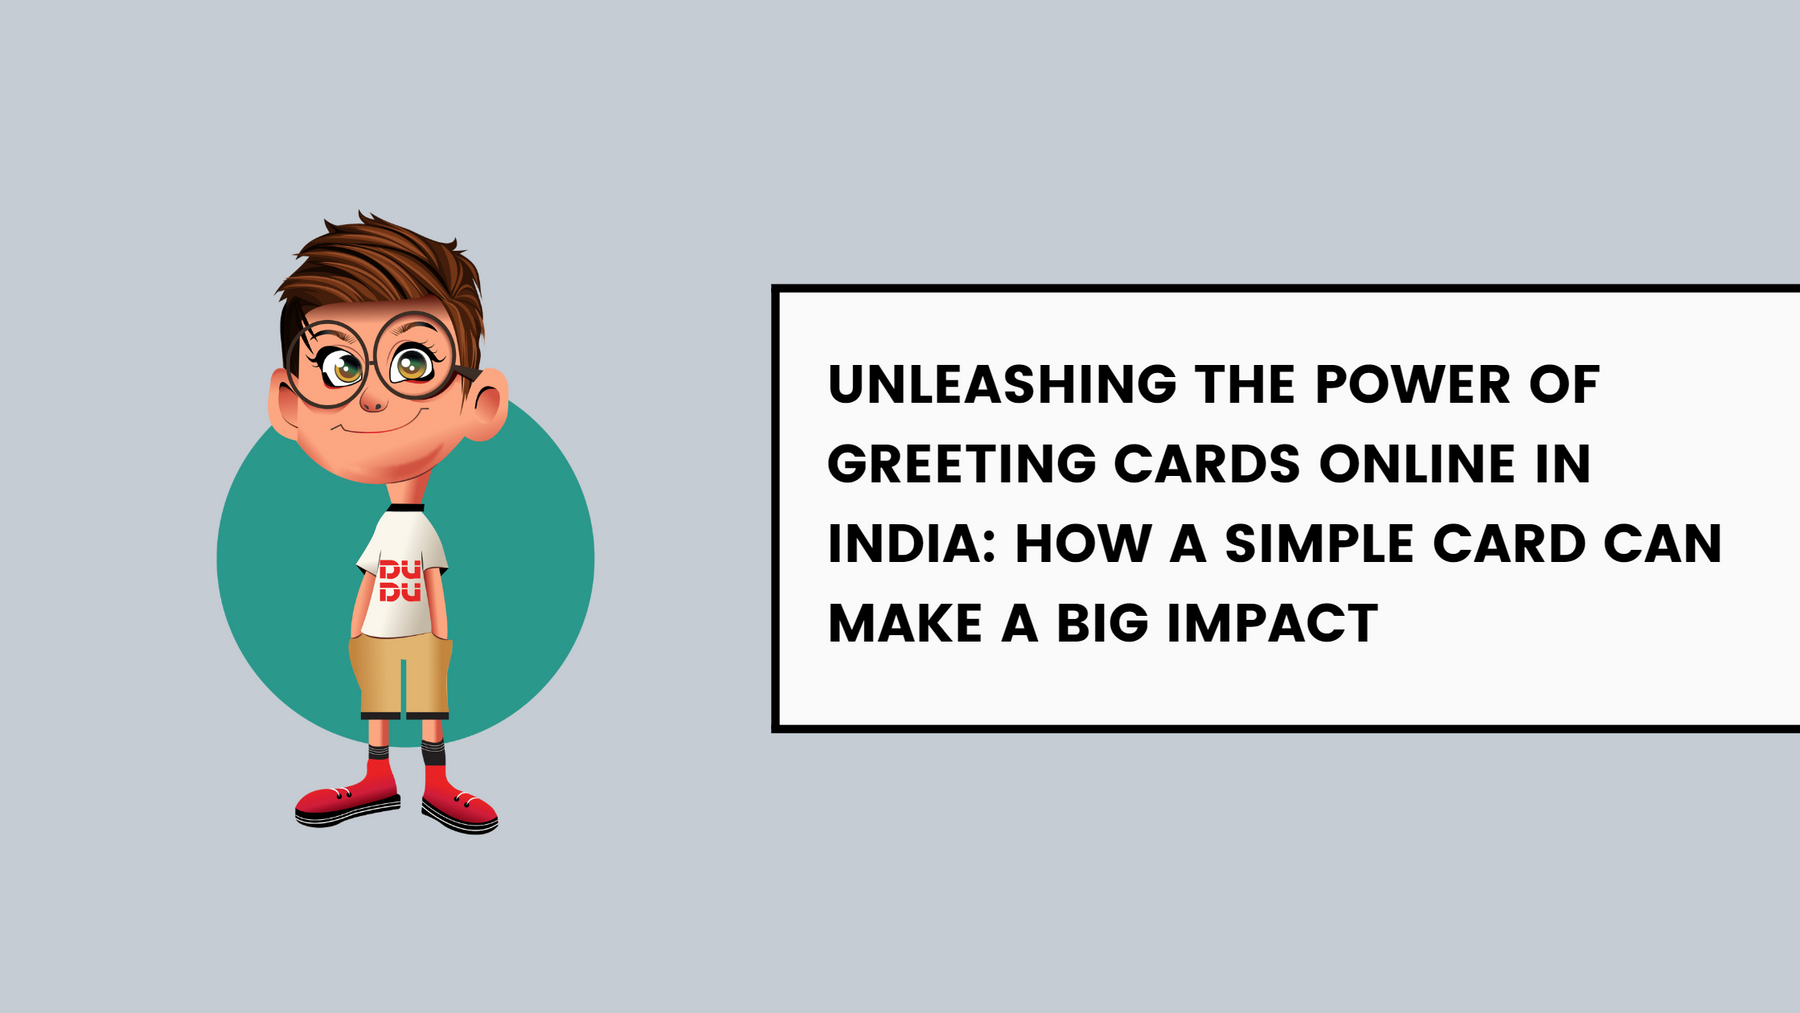 Unleashing the Power of Greeting Cards Online in India: How a Simple Card Can Make a Big Impact